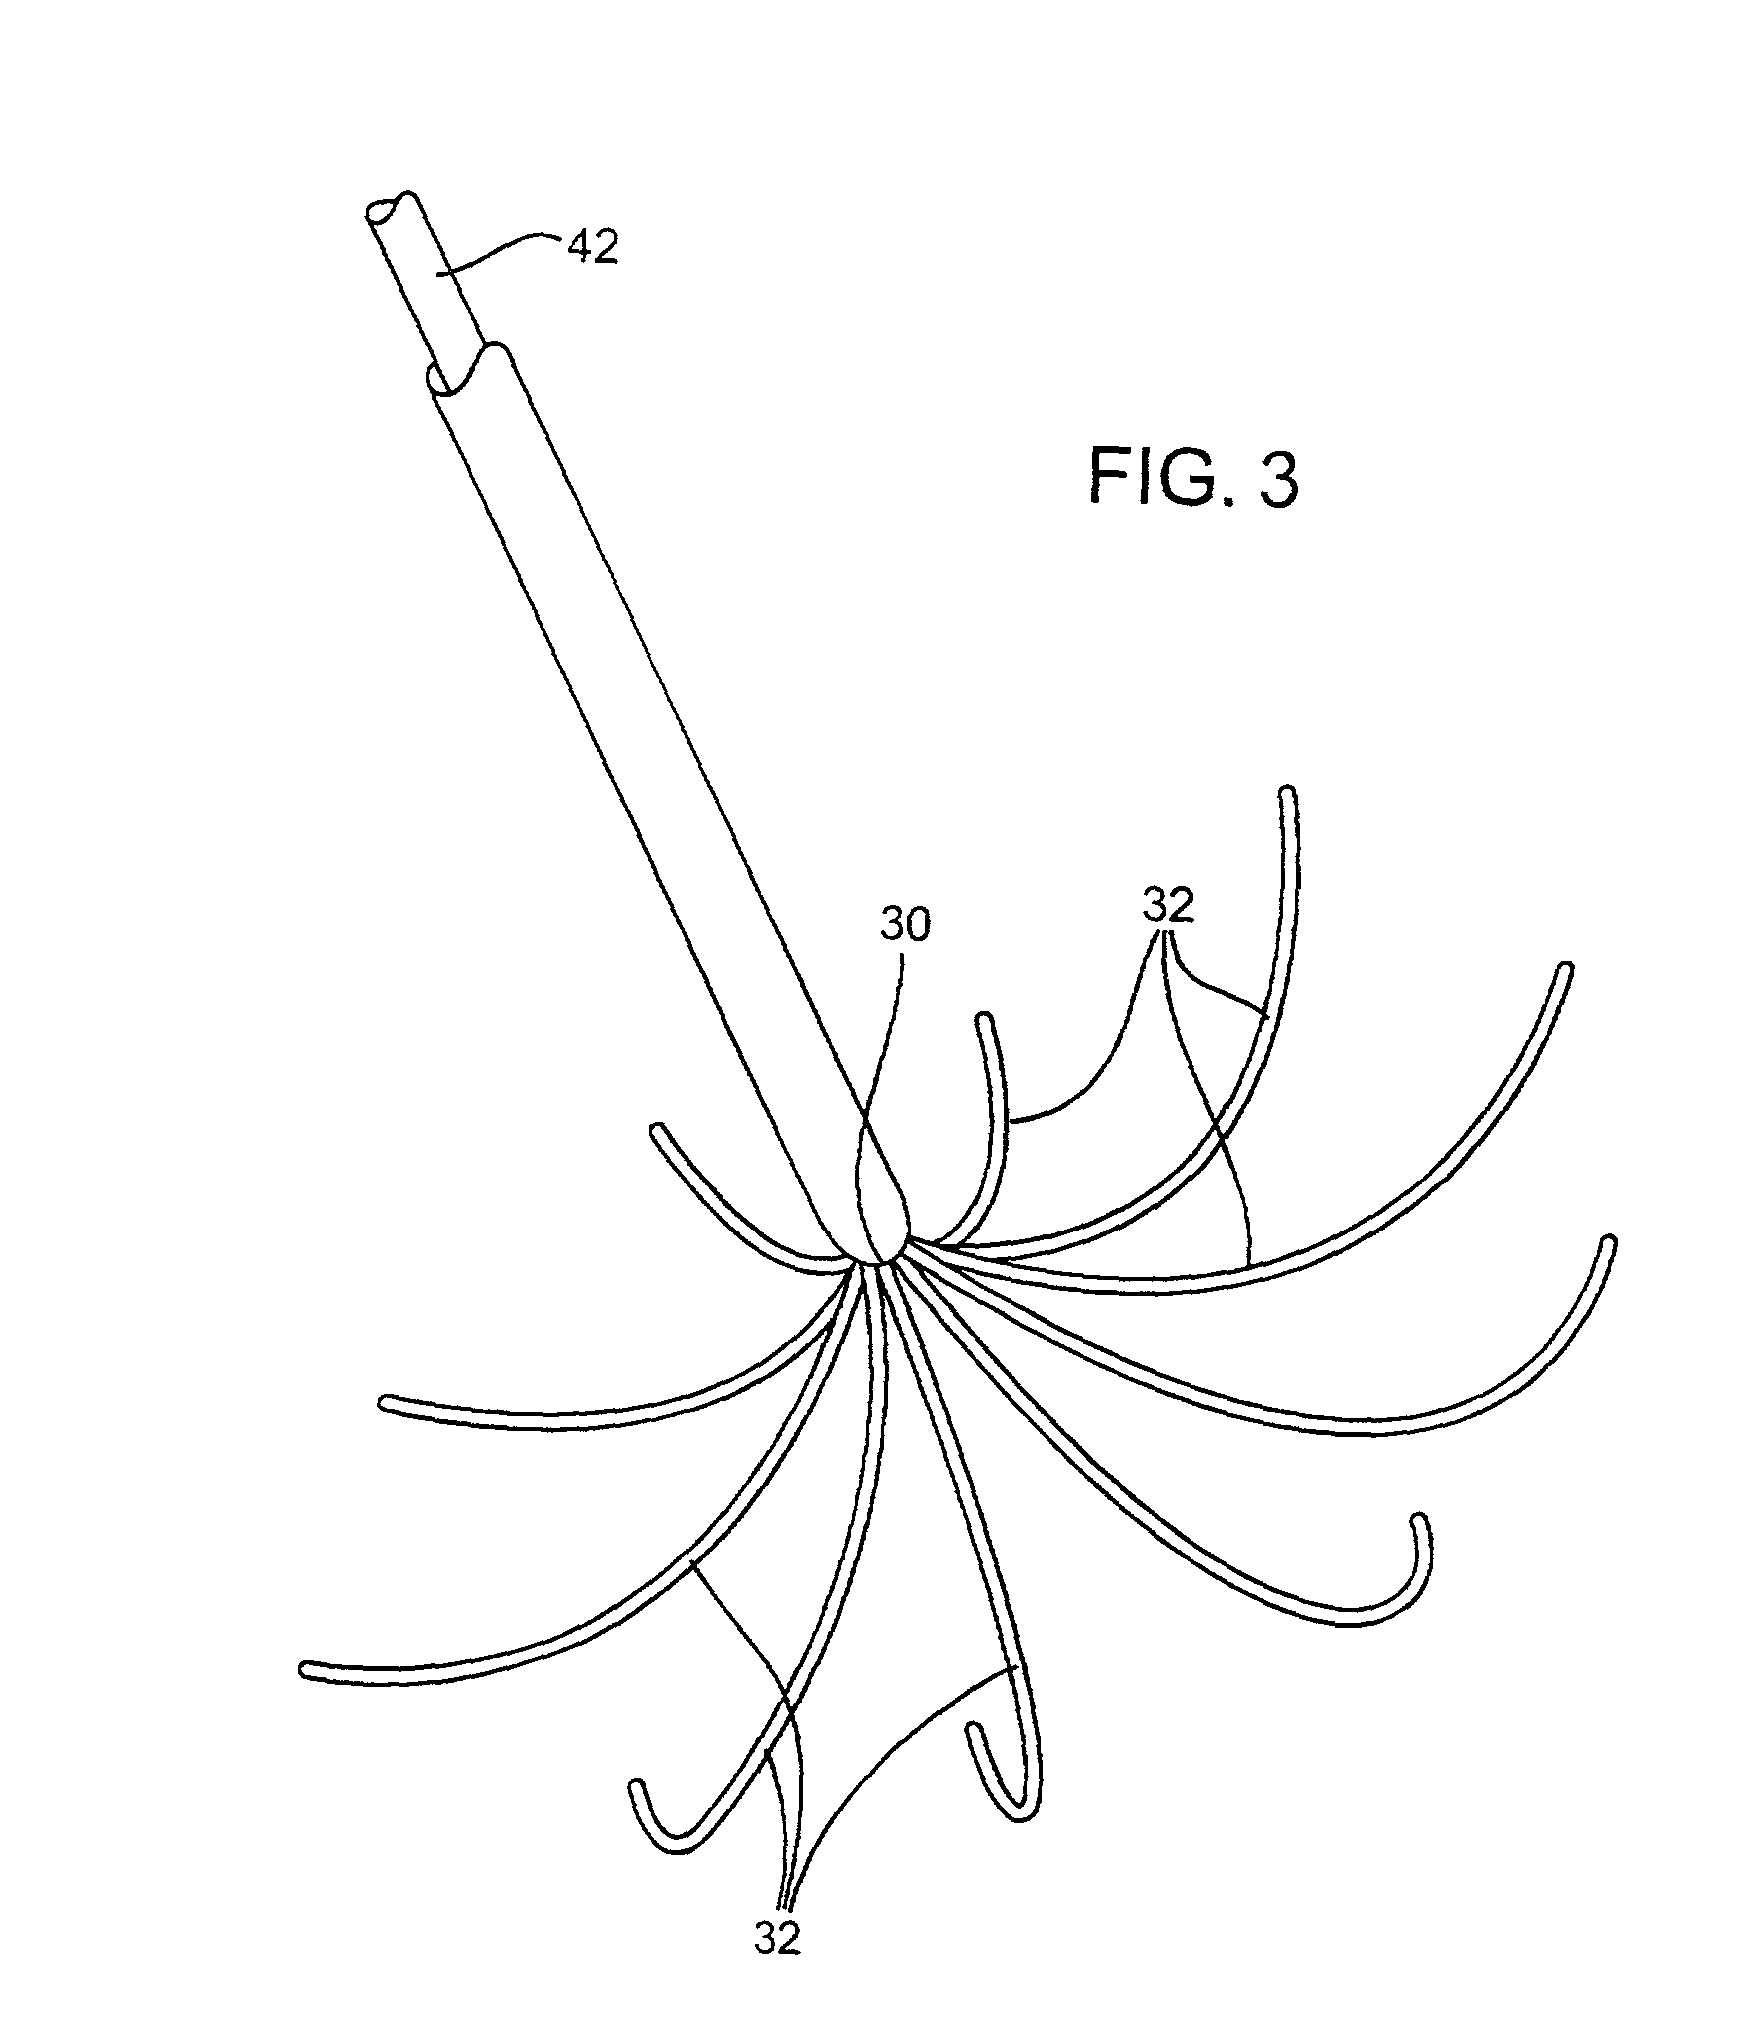 Apparatus and method for treating tumors near the surface of an organ